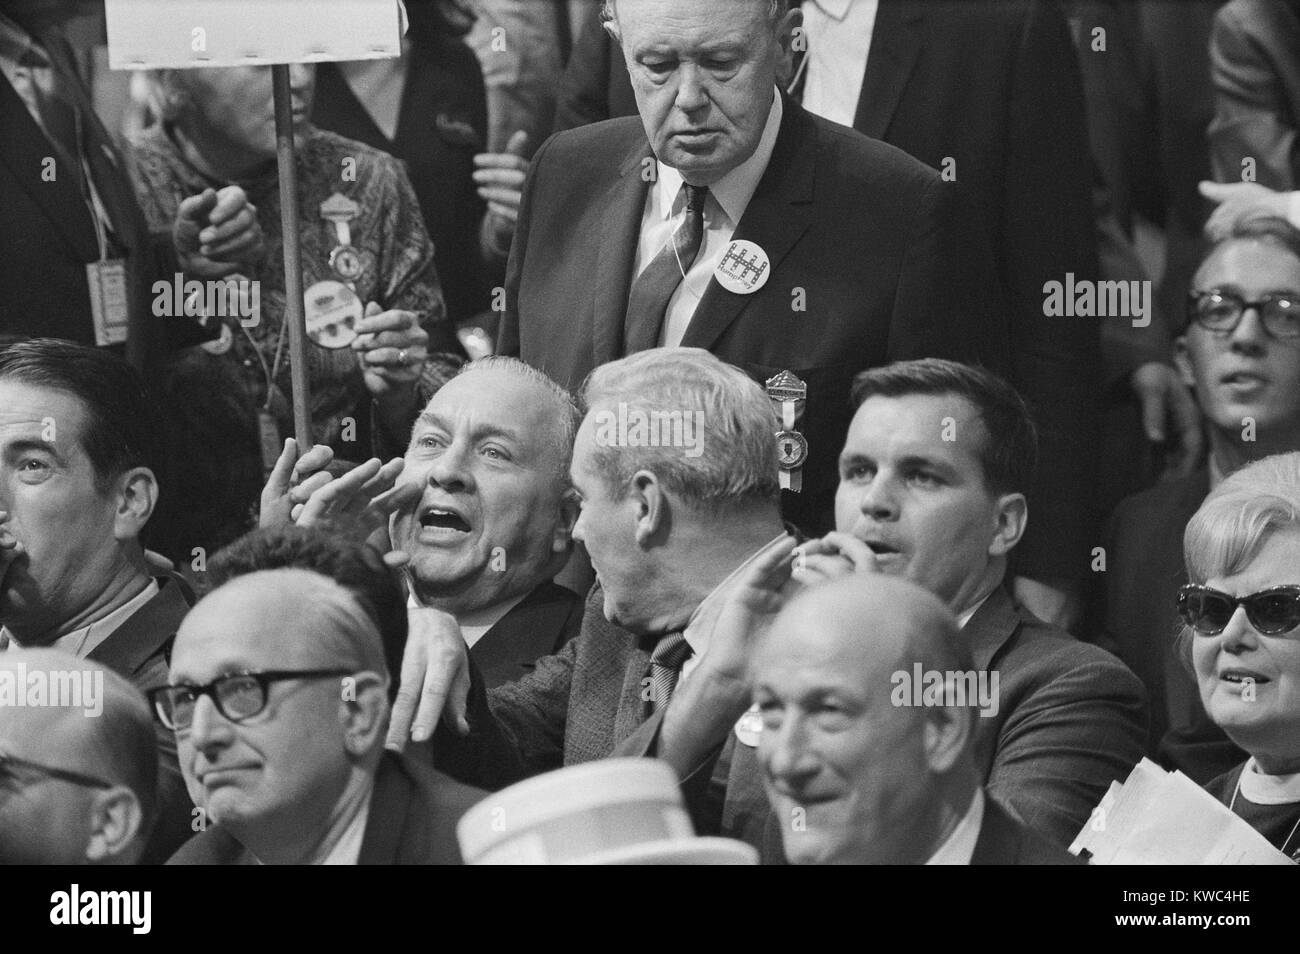 Chicago Mayor Richard Daley swearing at Senator Ribicoff during at the 1968 Democratic Convention. Ribicoff's speech criticized the 'Gestapo tactics' of the Chicago police against anti-Vietnam war protesters. Aug. 28, 1968. (BSLOC 2015 2 219) Stock Photo